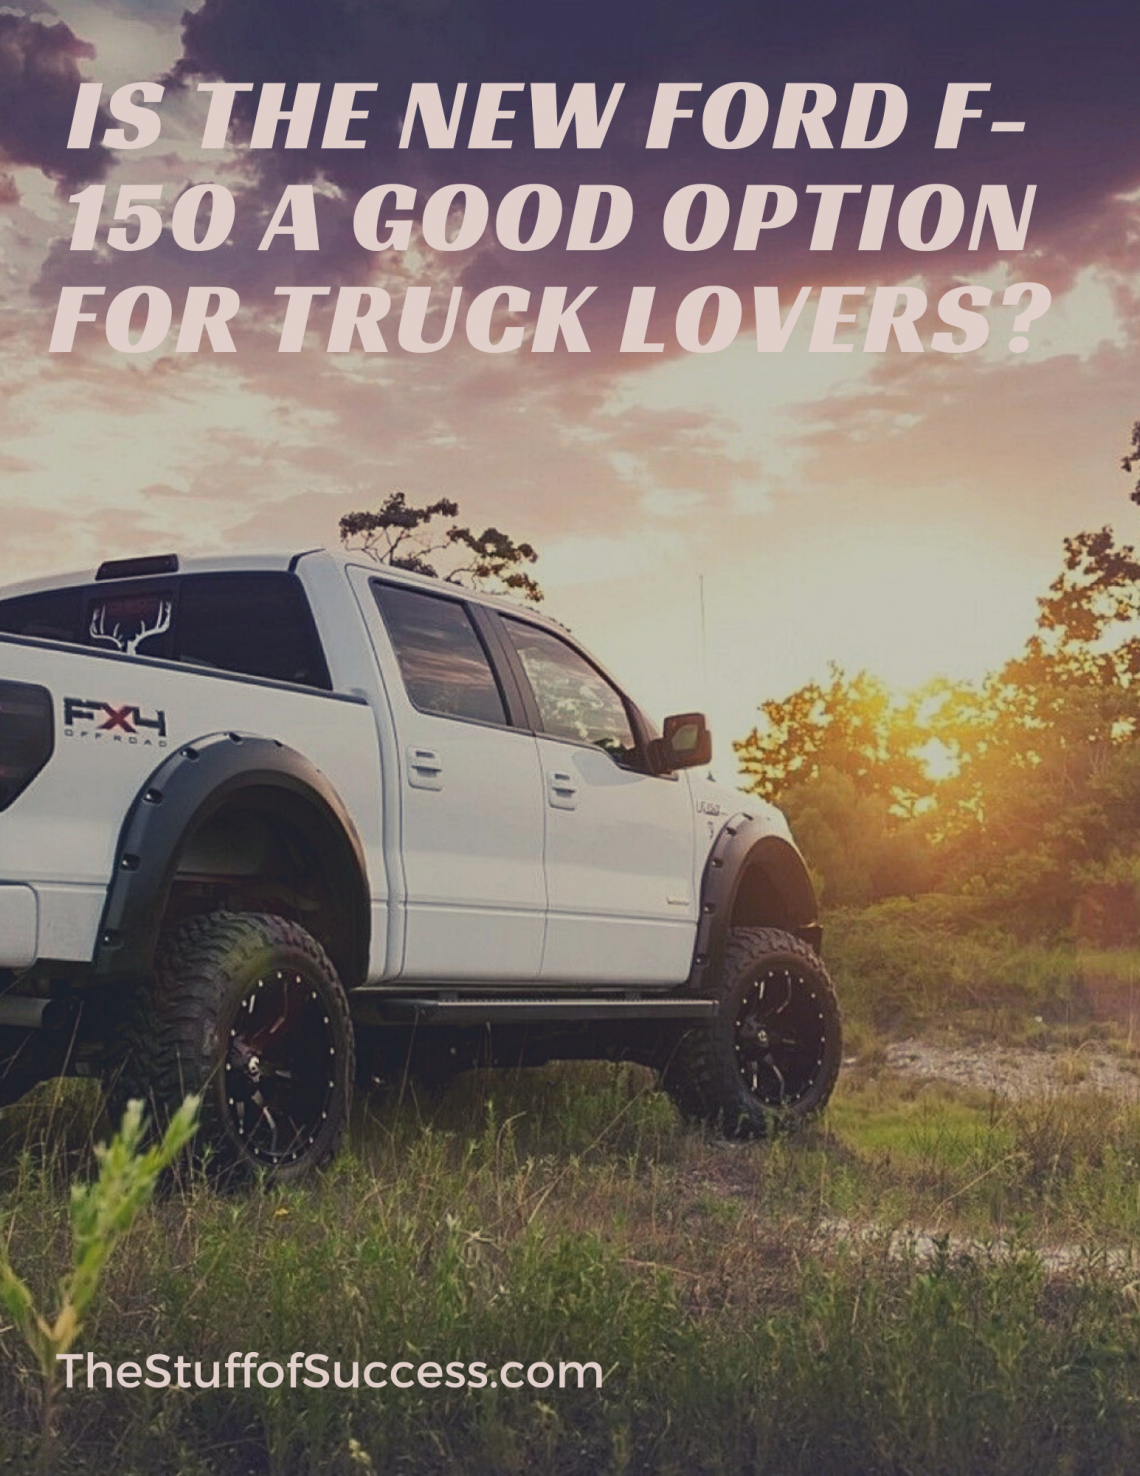 Is The New Ford F-150 A Good Option For Truck Lovers?